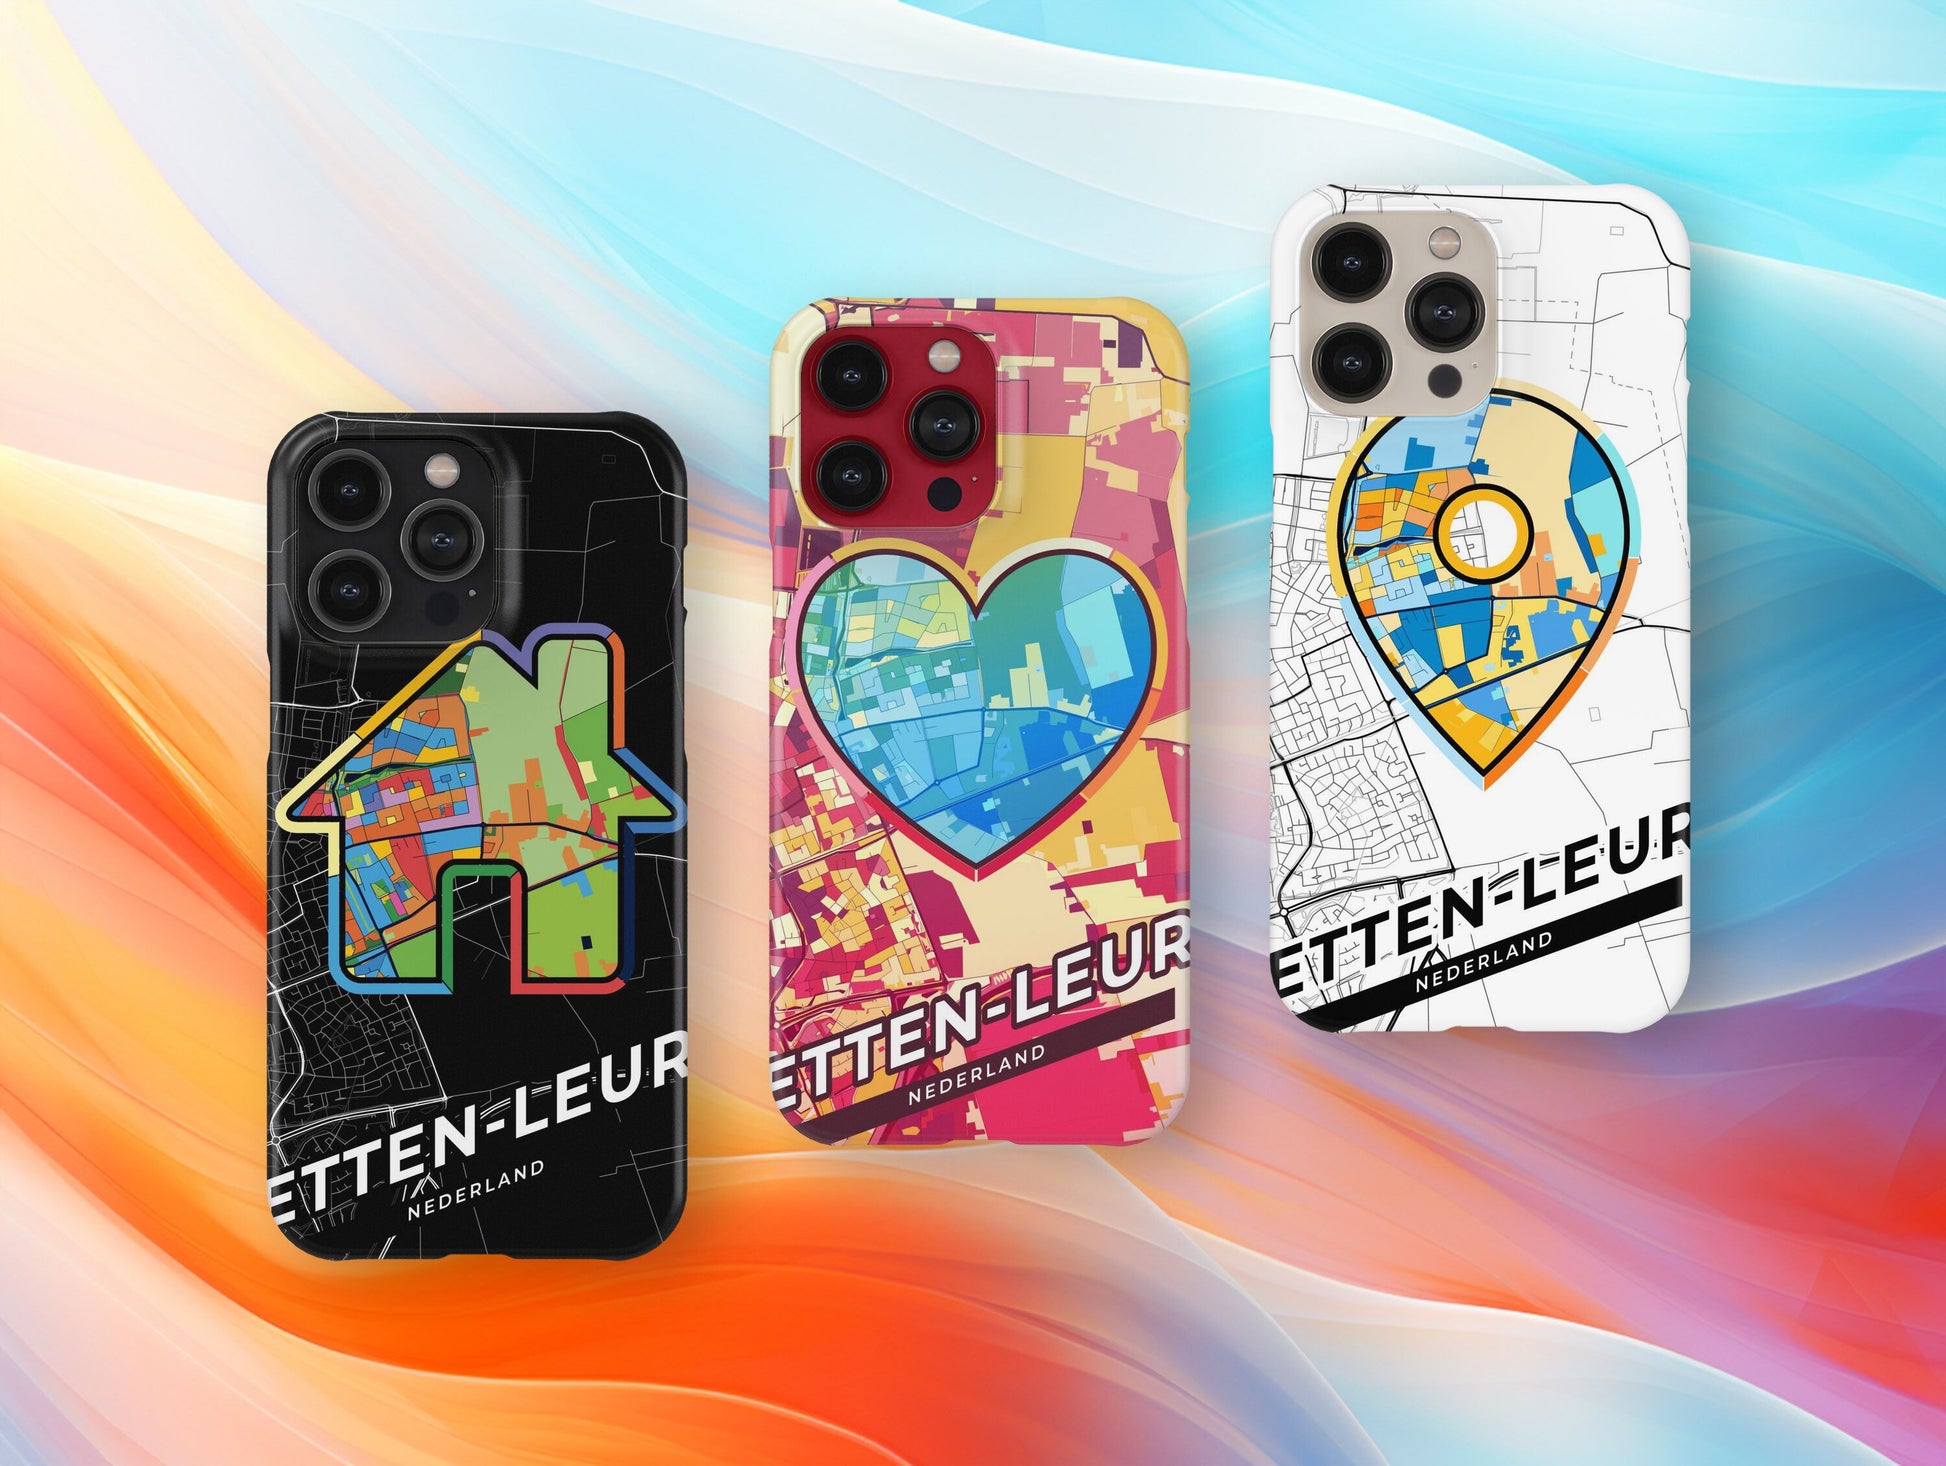 Etten-Leur Netherlands slim phone case with colorful icon. Birthday, wedding or housewarming gift. Couple match cases.